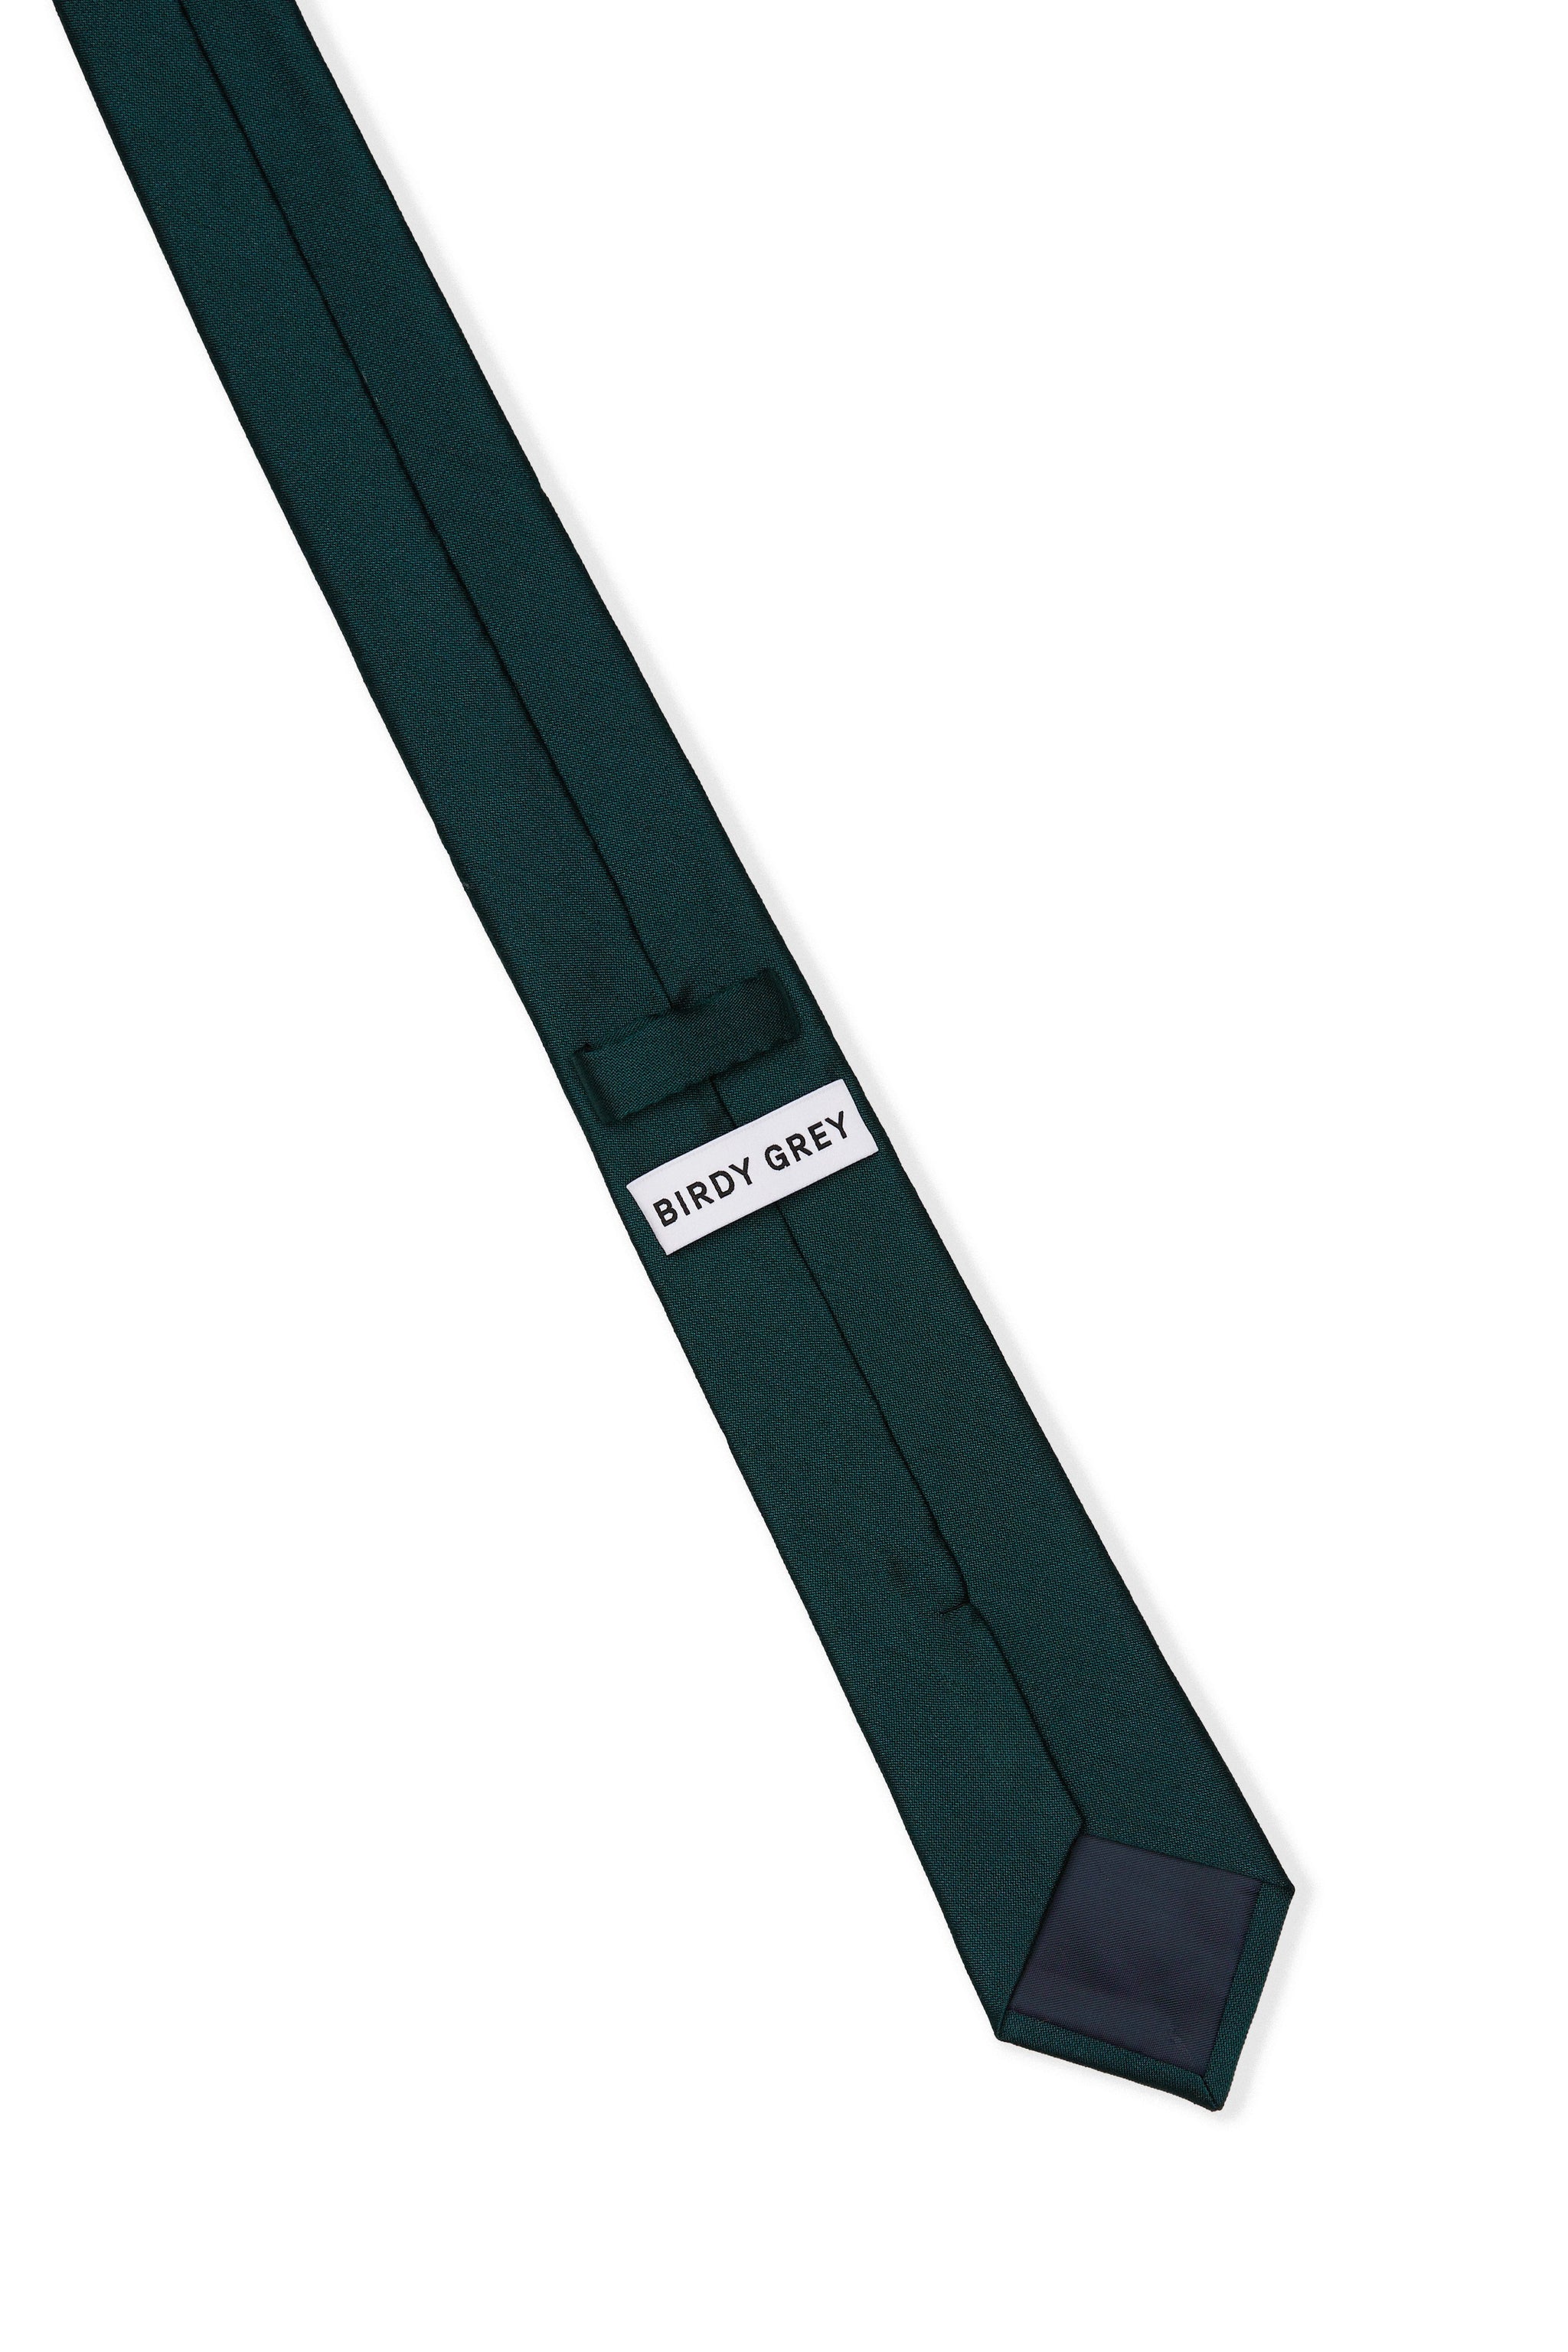 Elevated back view of the Simon Necktie in emerald fully extended on a white background showing the necktie satin lining in black, a keeper loop to tuck the necktie end, and a label that reads, 